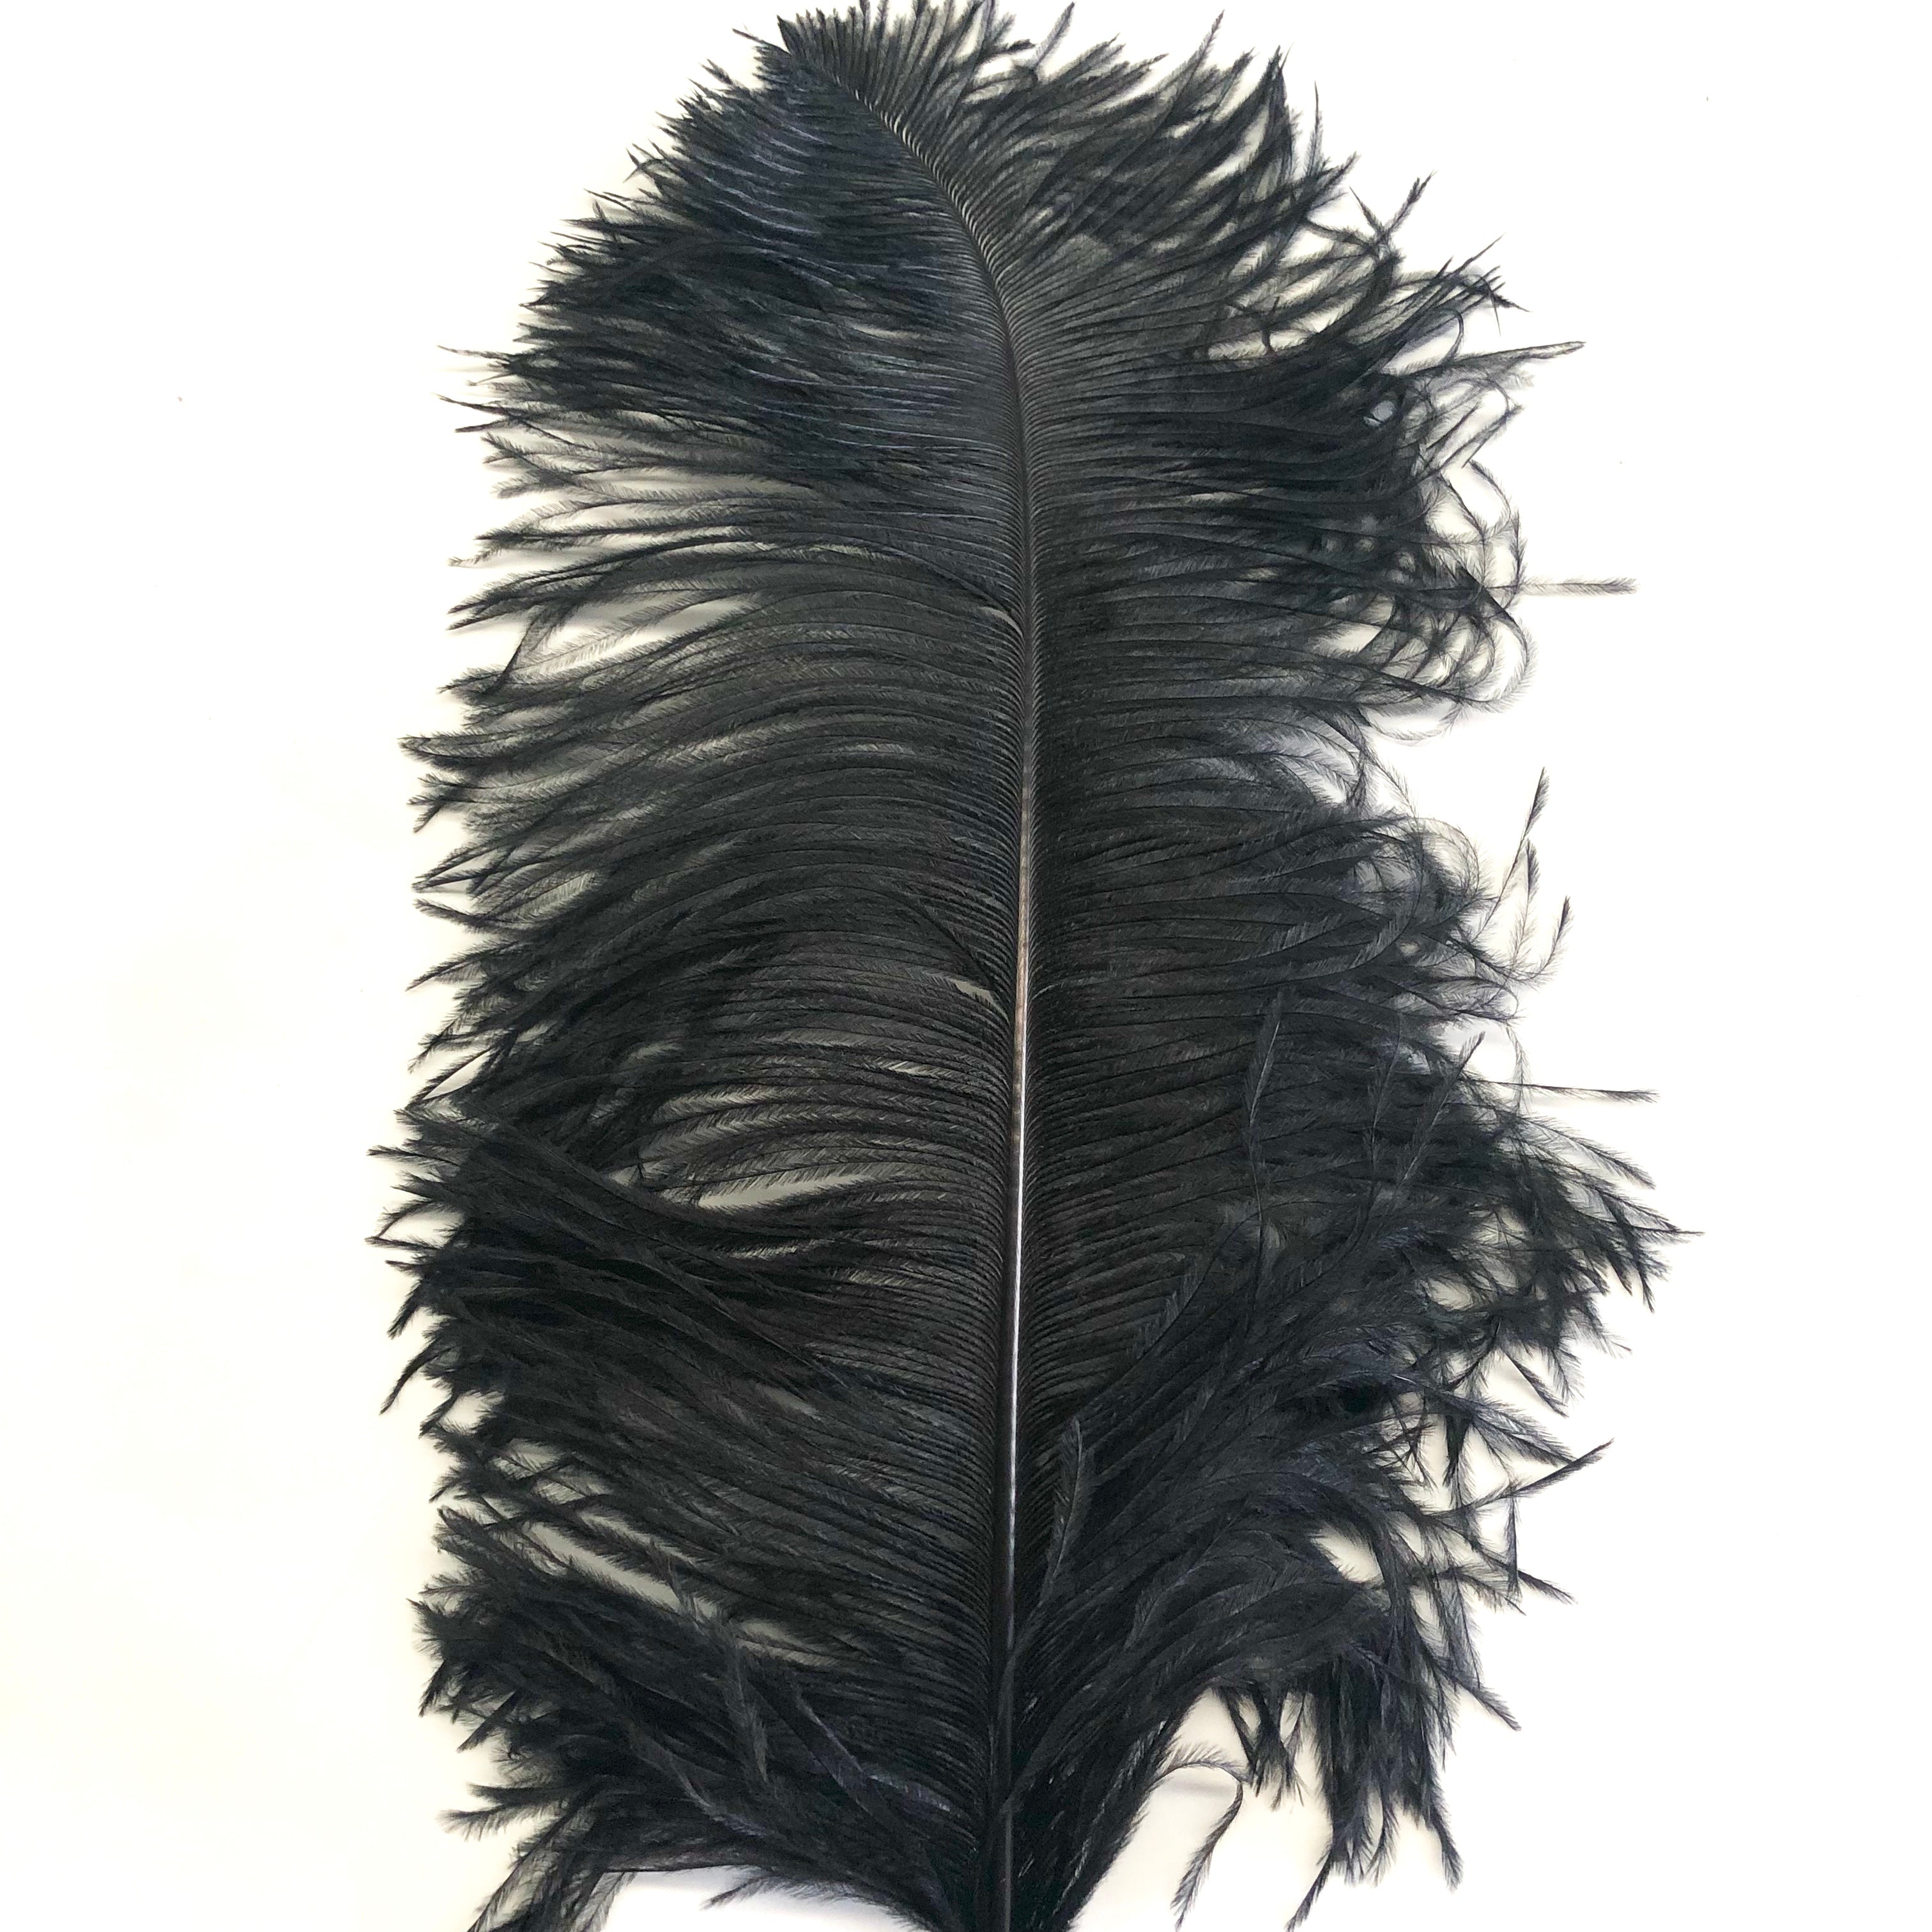 Ostrich Wing Feather Plumes 60-65cm (24-26") - Black ((SECONDS))